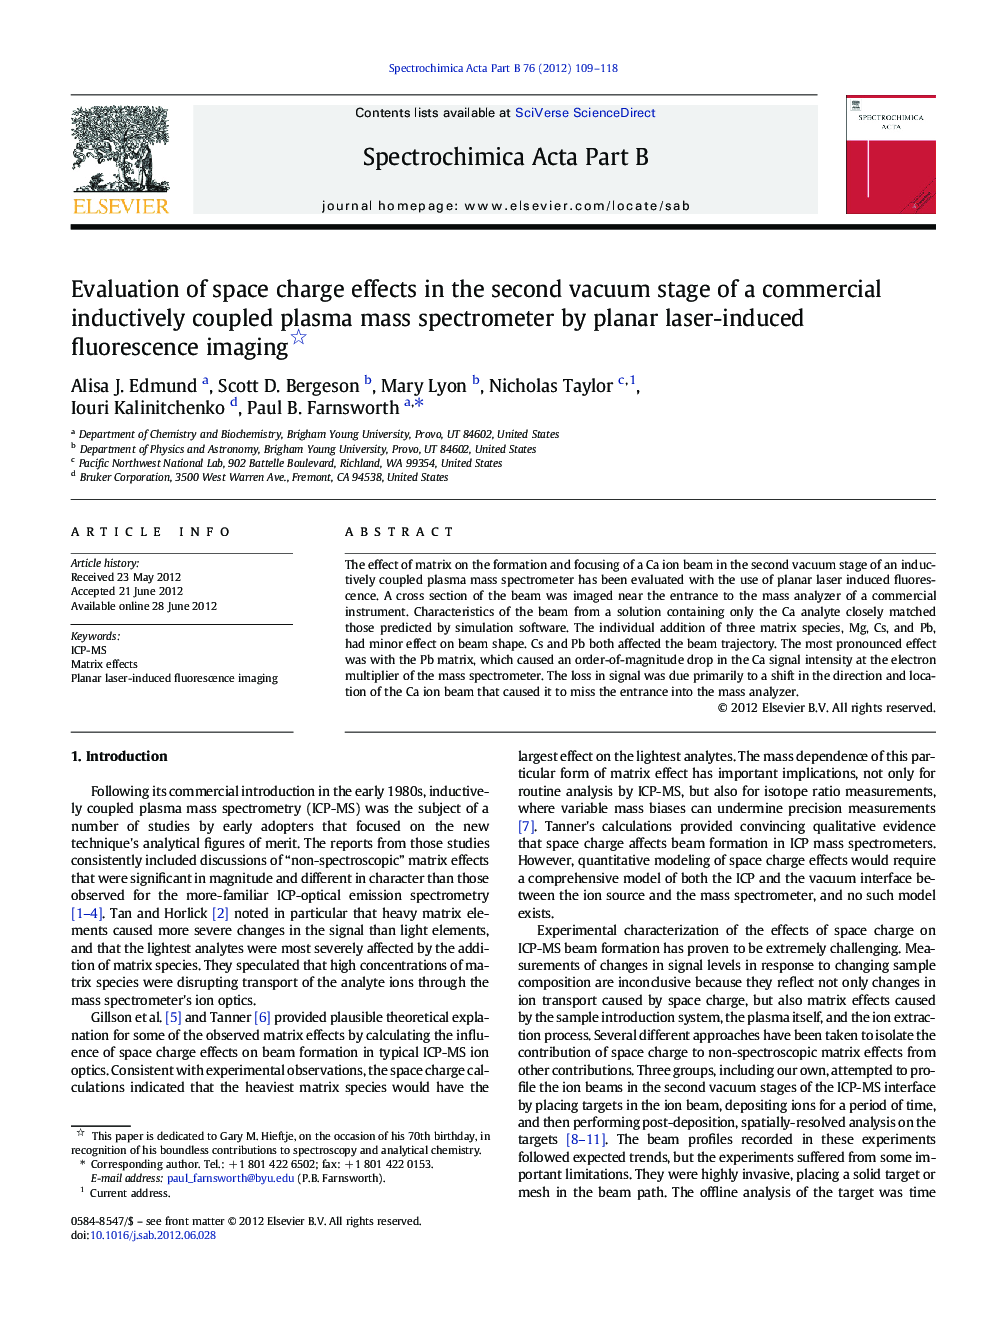 Evaluation of space charge effects in the second vacuum stage of a commercial inductively coupled plasma mass spectrometer by planar laser-induced fluorescence imaging